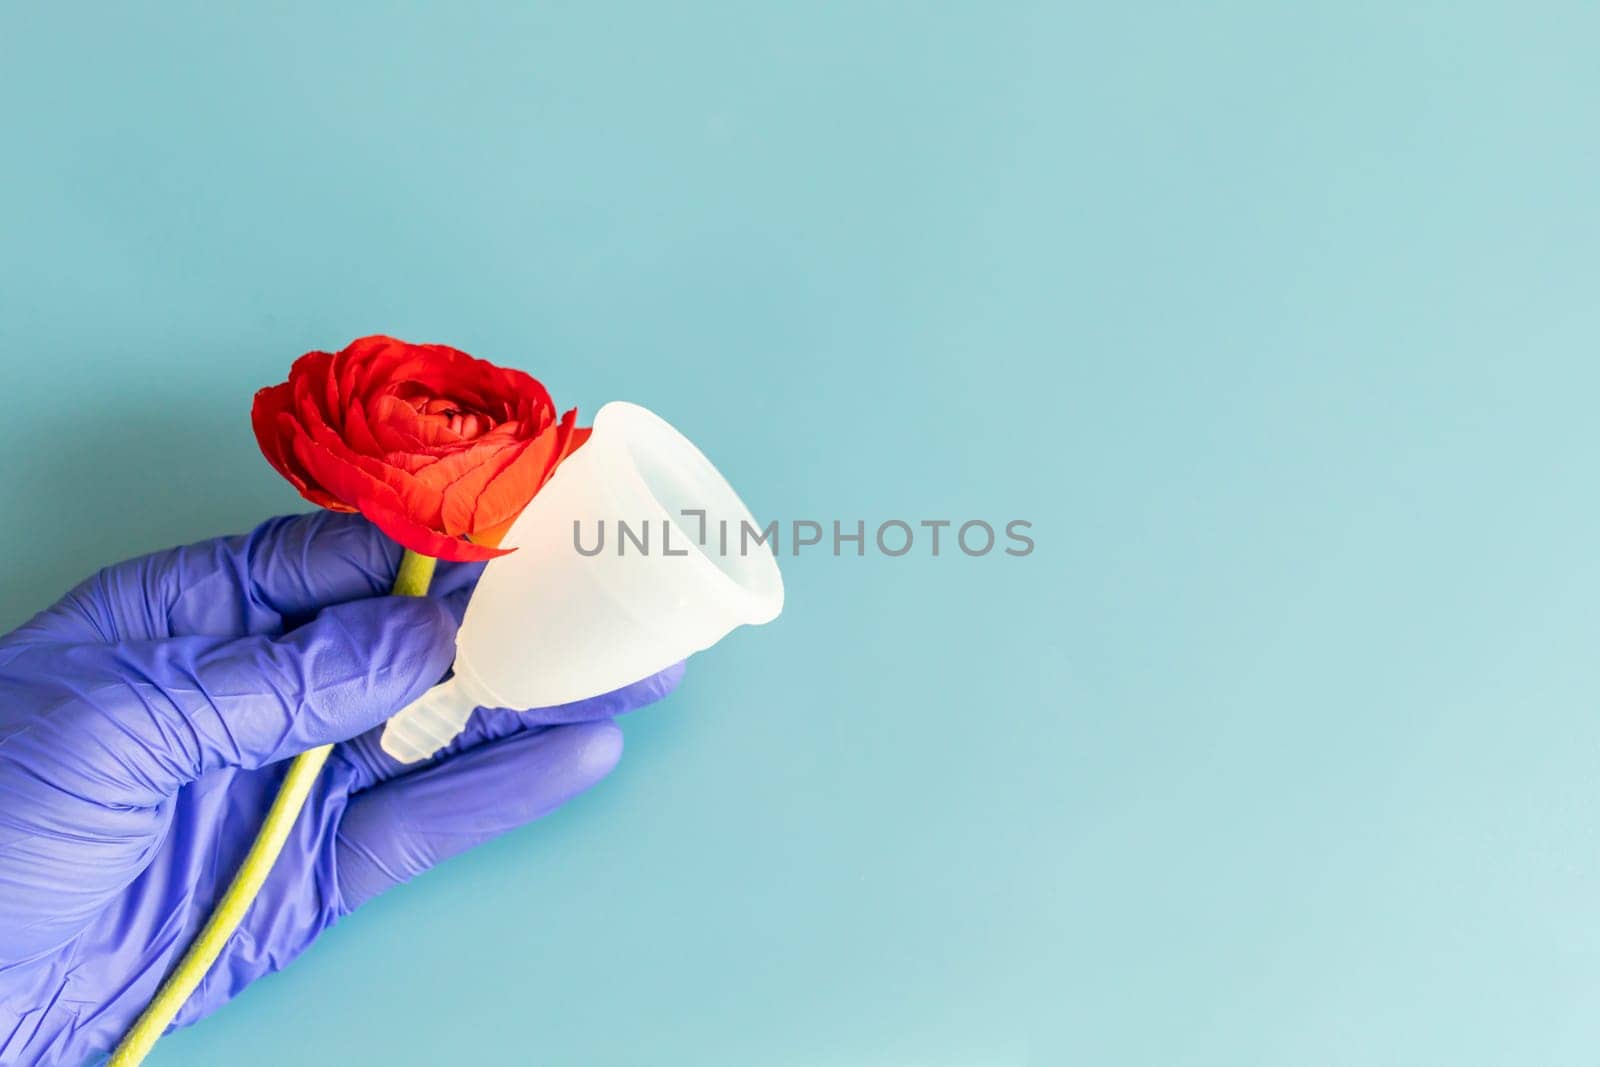 Mockup World Menstrual Hygiene Day On May, 28. Human Hand in Glove Holds menstrual cup and Red Flower on Blue Backdrop Copy Space, Horizontal Plane, Design. High quality photo